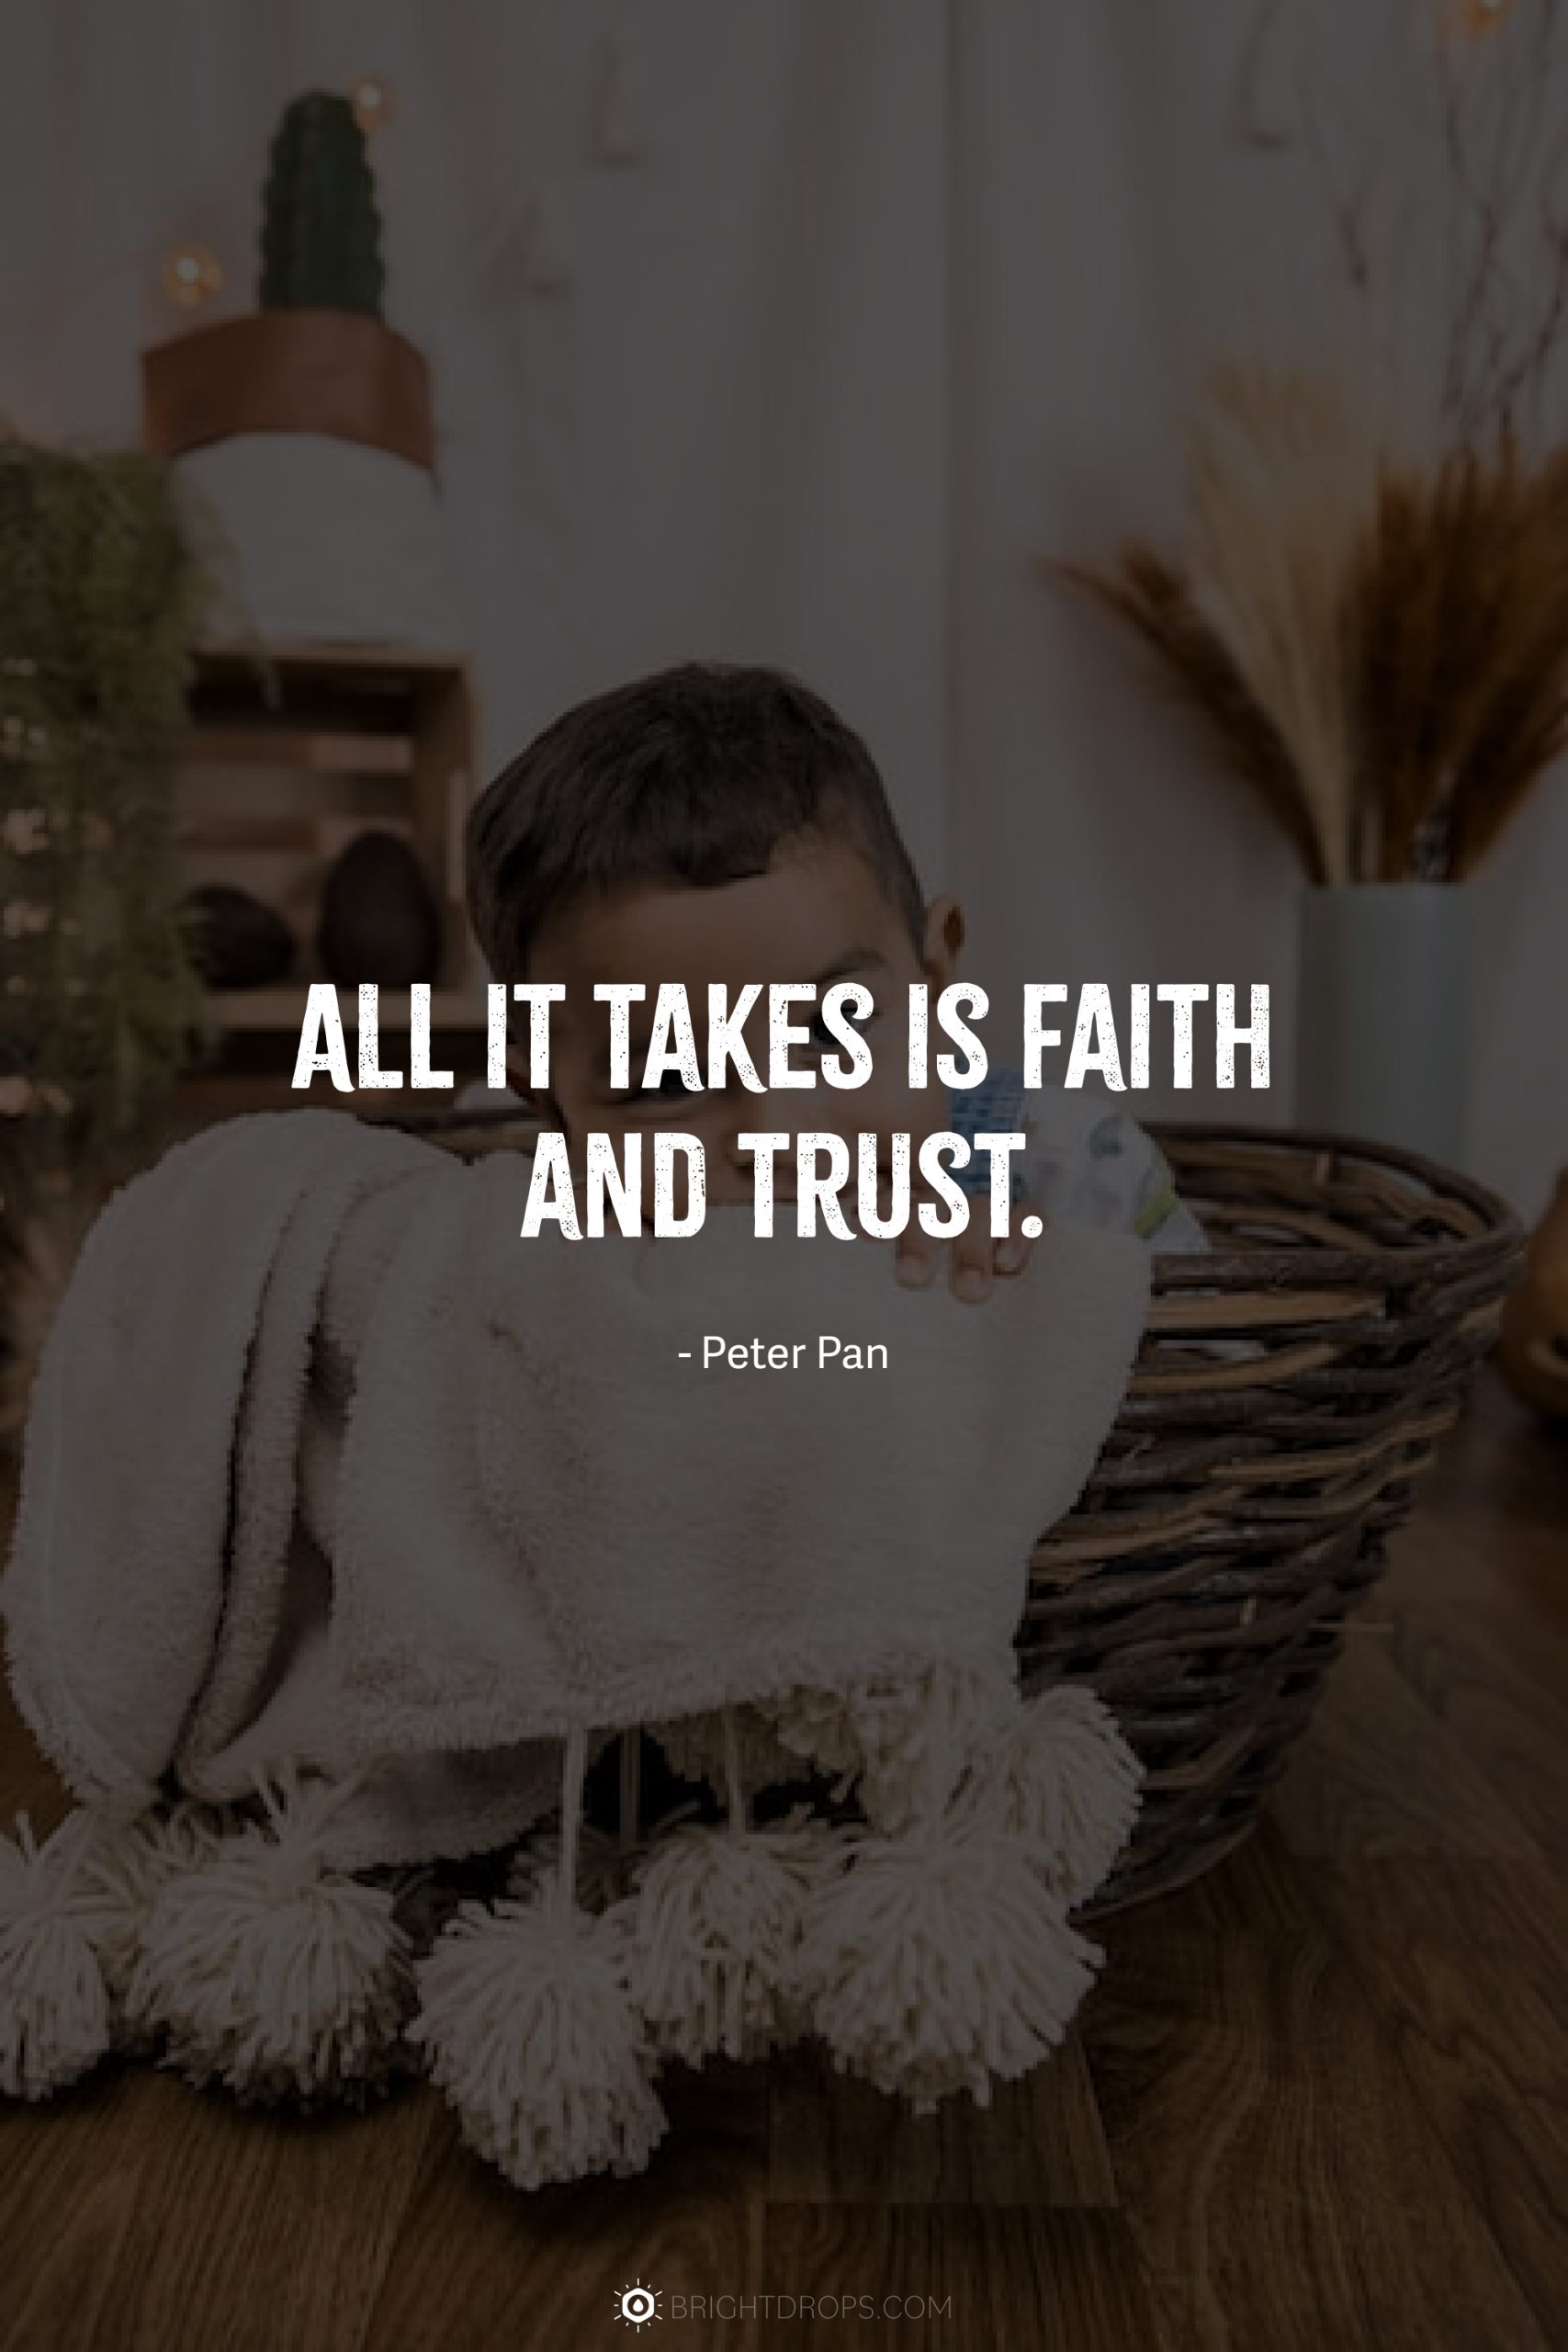 All it takes is faith and trust.